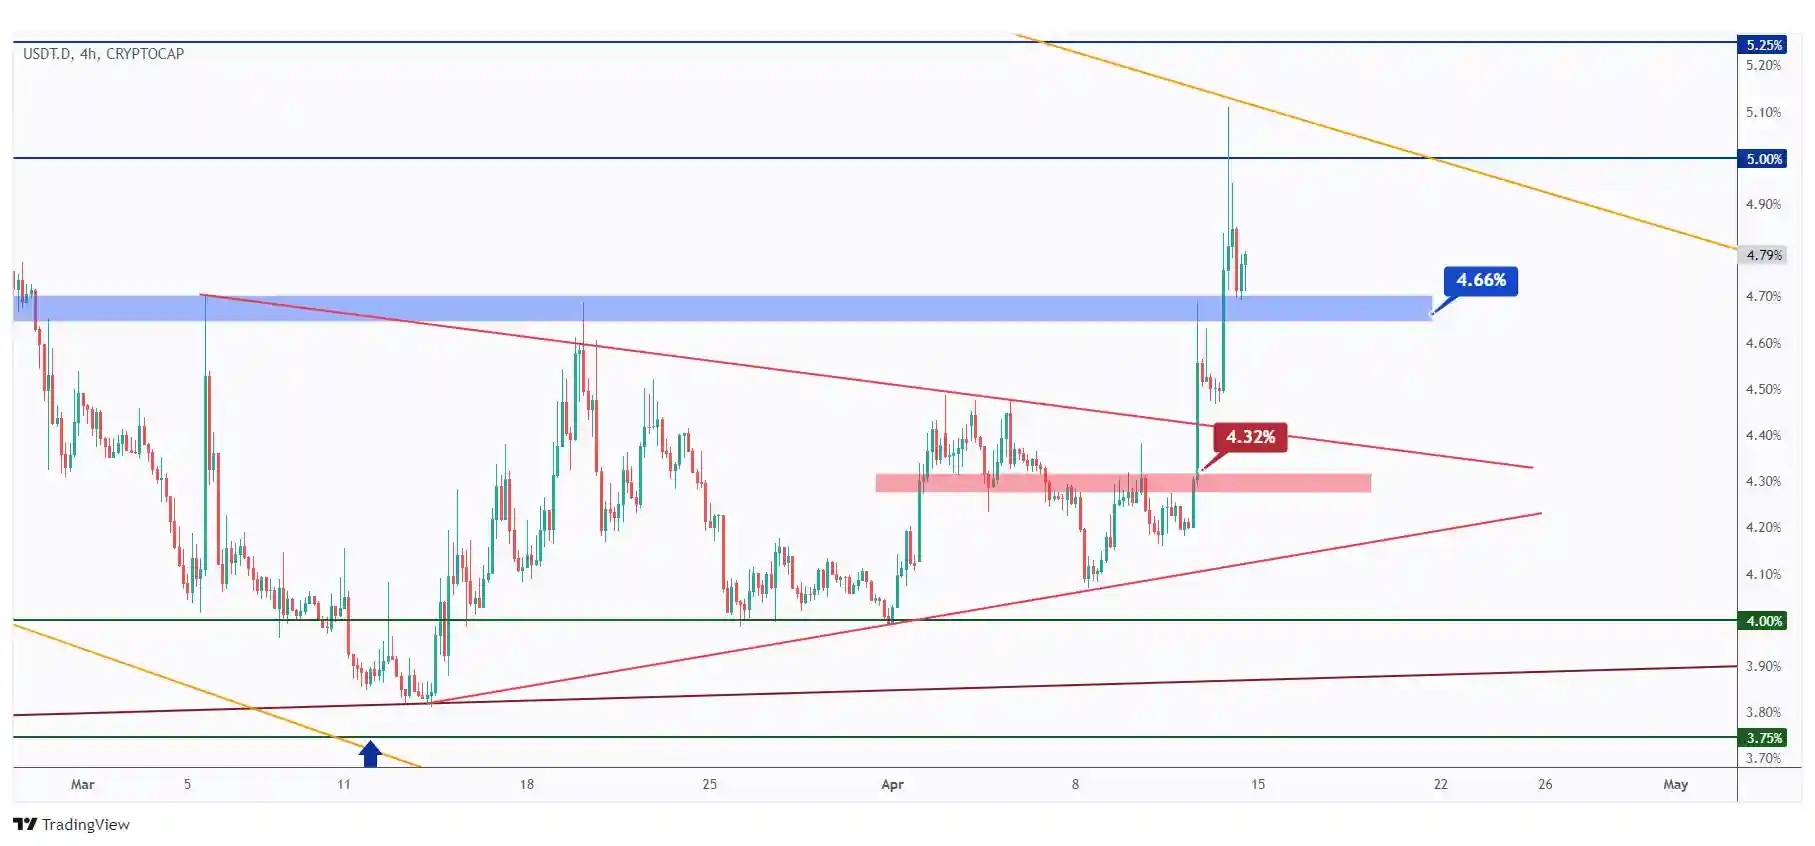 USDT.D 4h chart showing the last major low at 4.66% that we need a break below for the bears to take over.